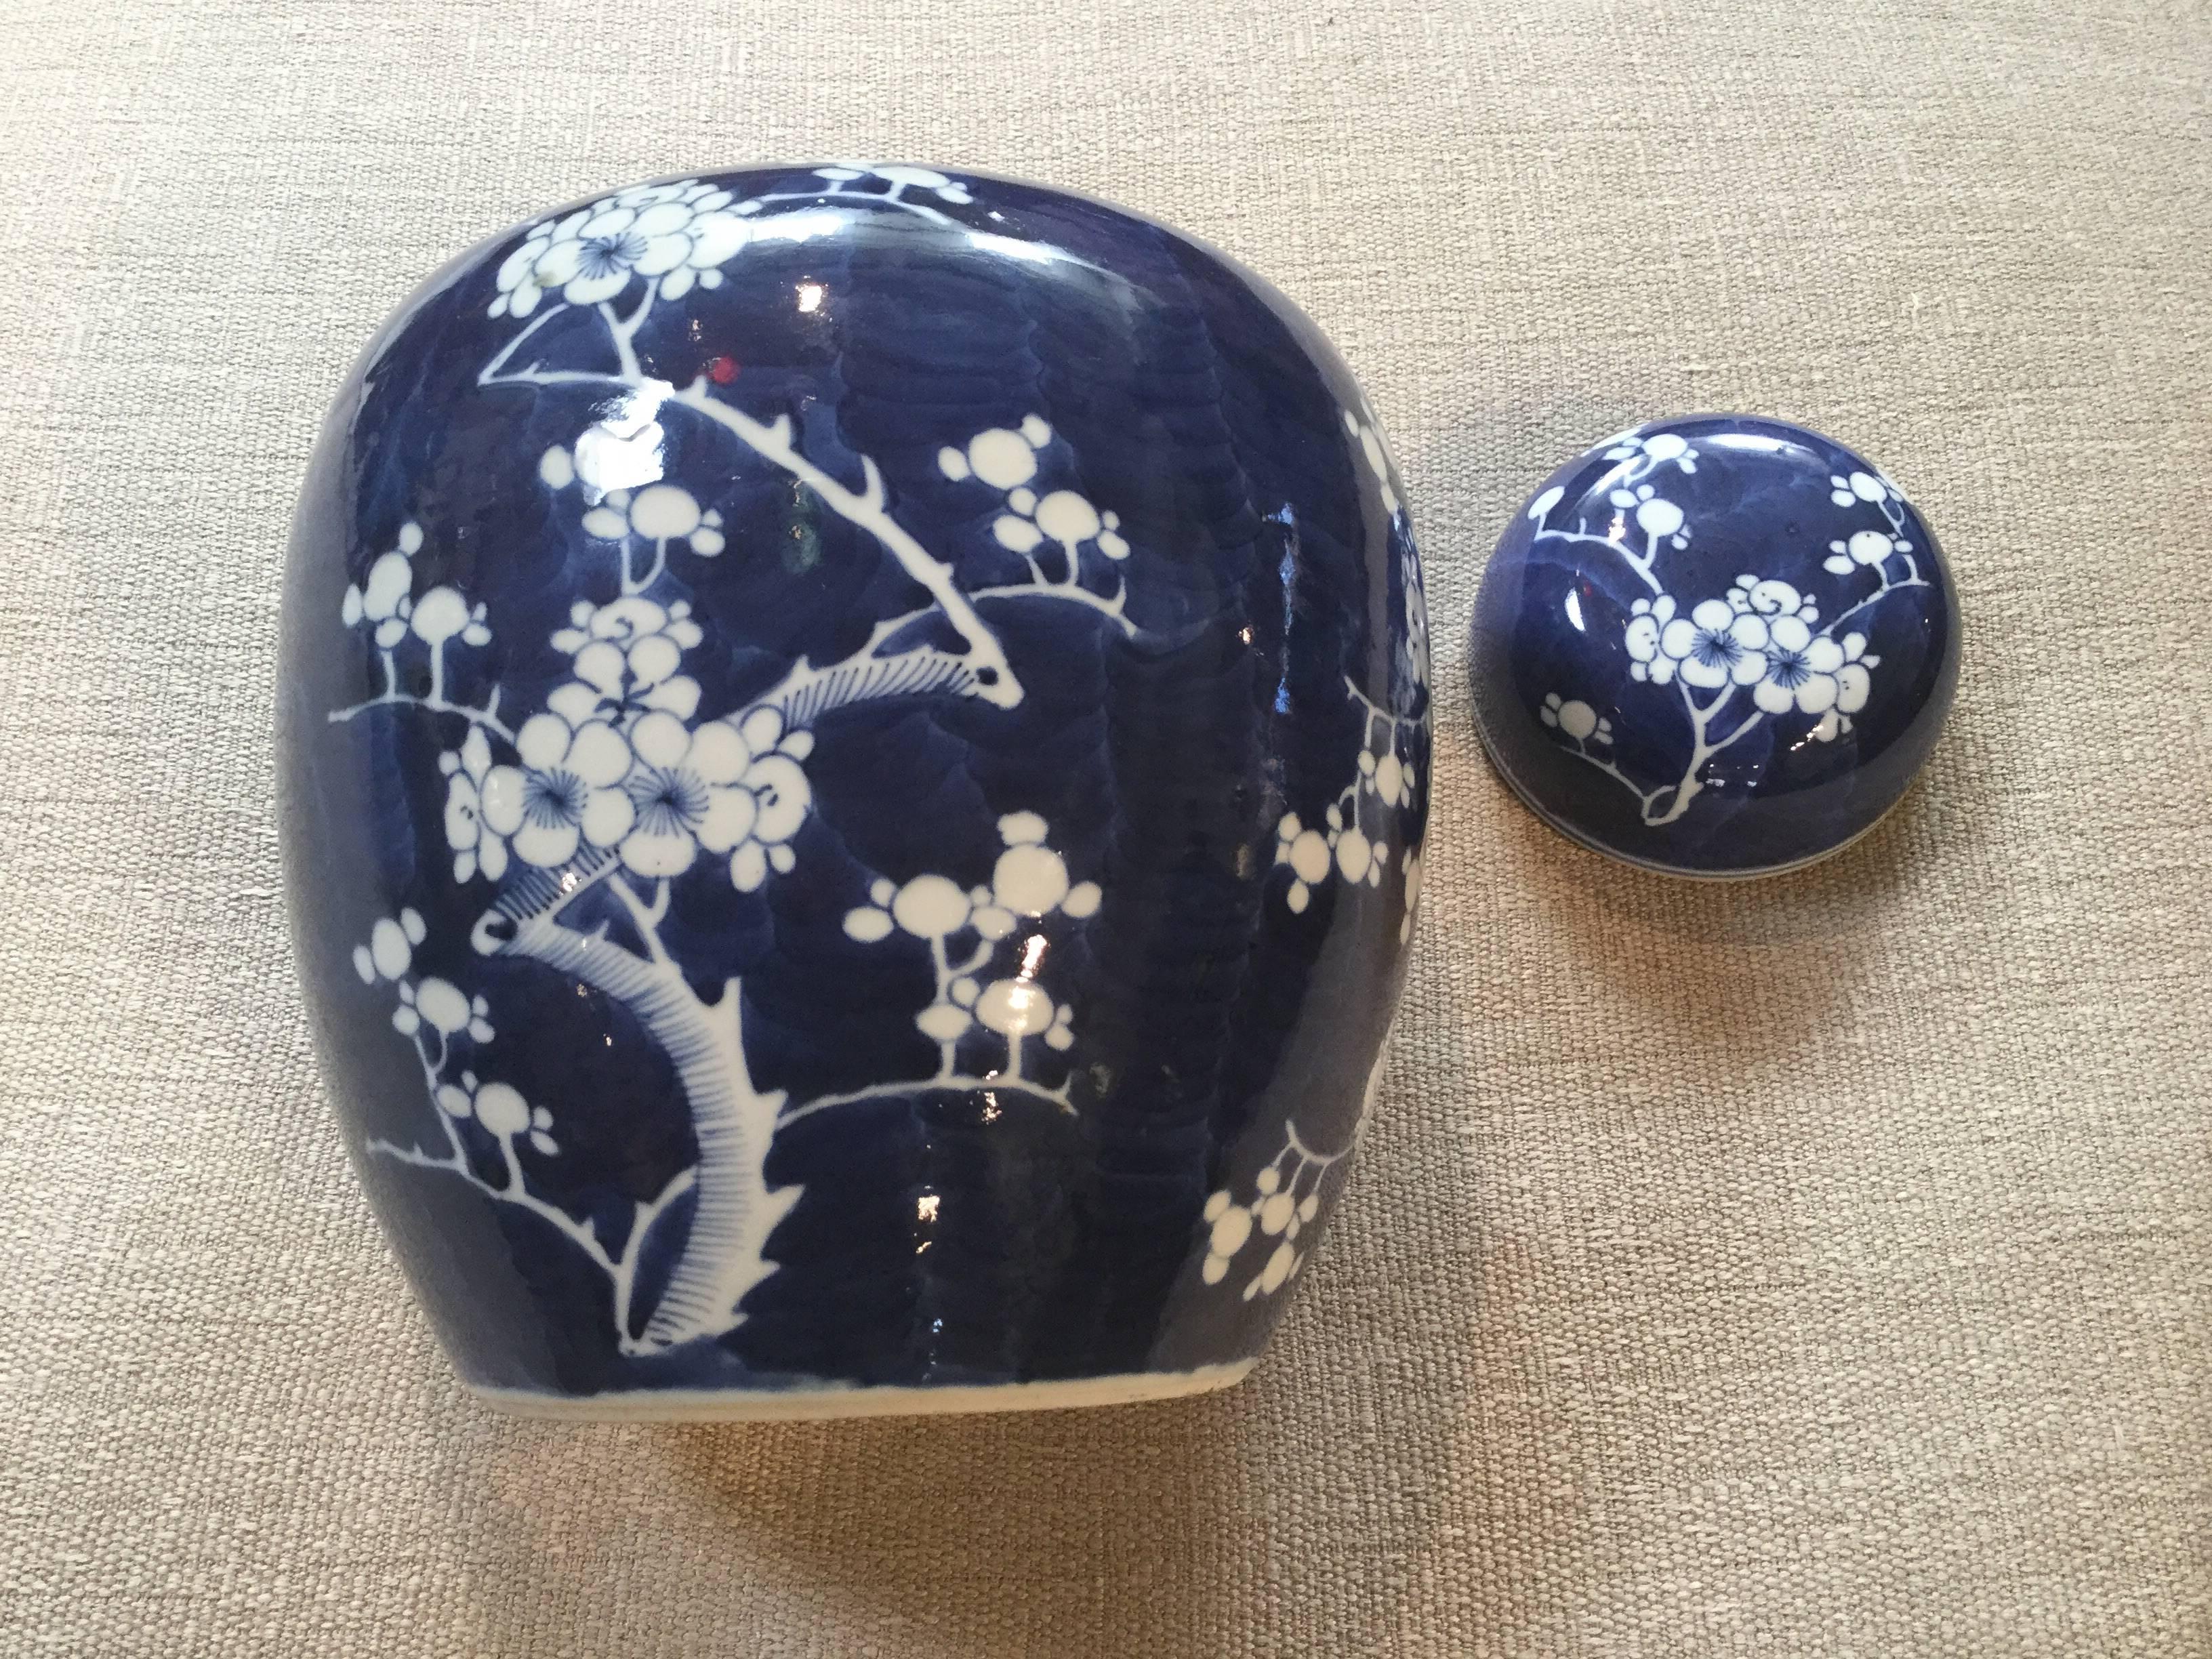 Two beautiful deep blue and white lidded ginger jars on carved hardwood stands. Painted cherry blossom motif showing white porcelains under glaze. Deep blue background brings out the elegant details. One lid has been professionally repaired, almost